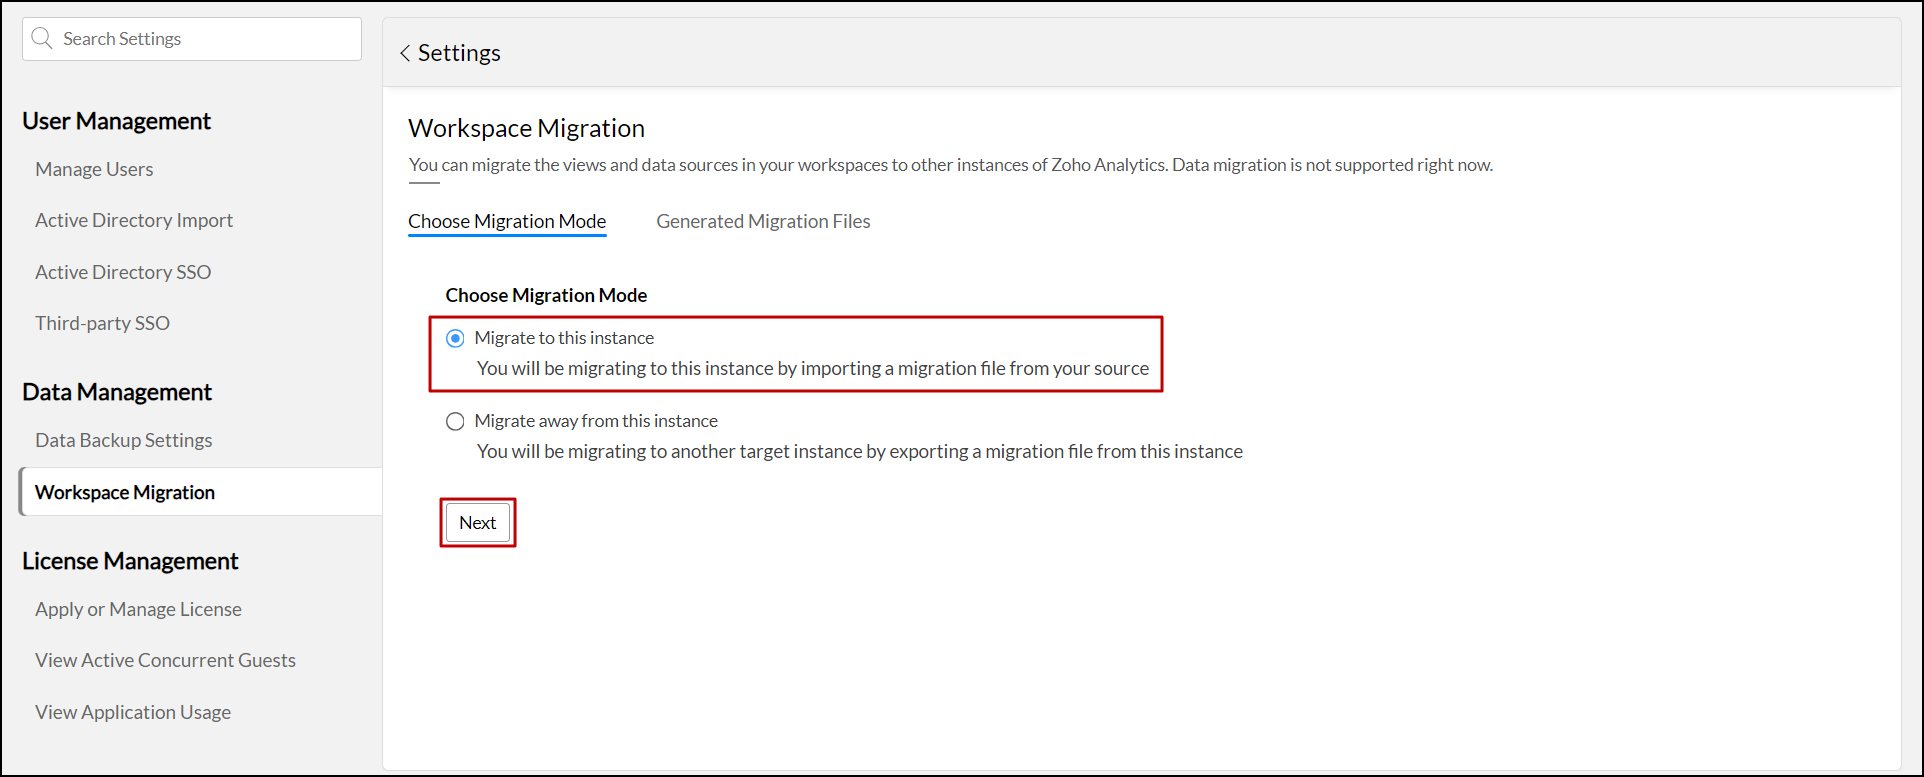 zoho-analytics-migrate-to-this-instance-option